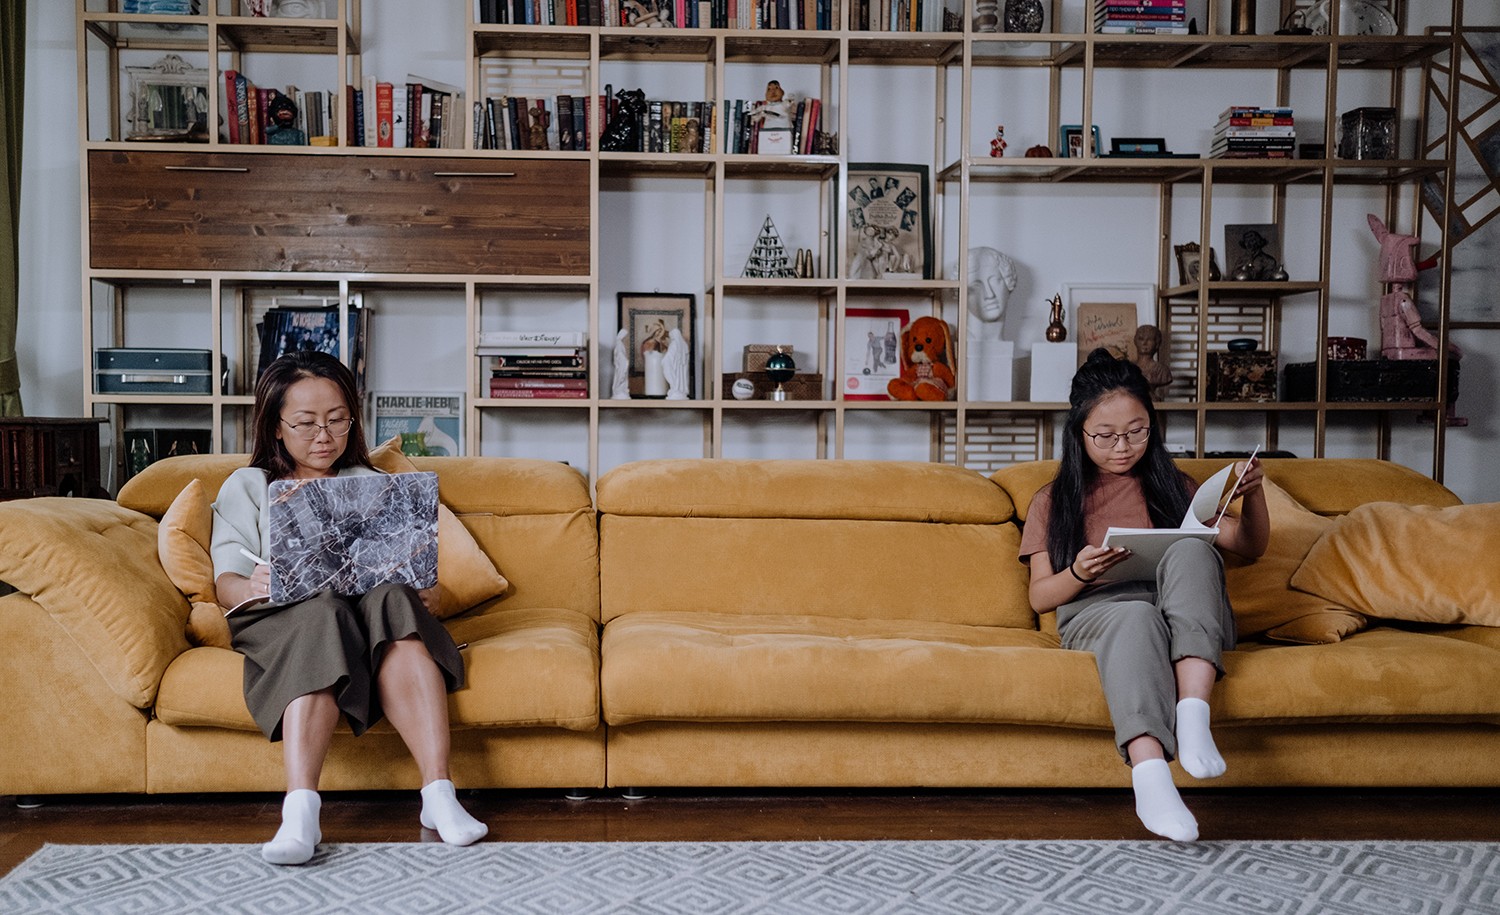 A mother and daughter, who are both introverts, sit far apart on a couch